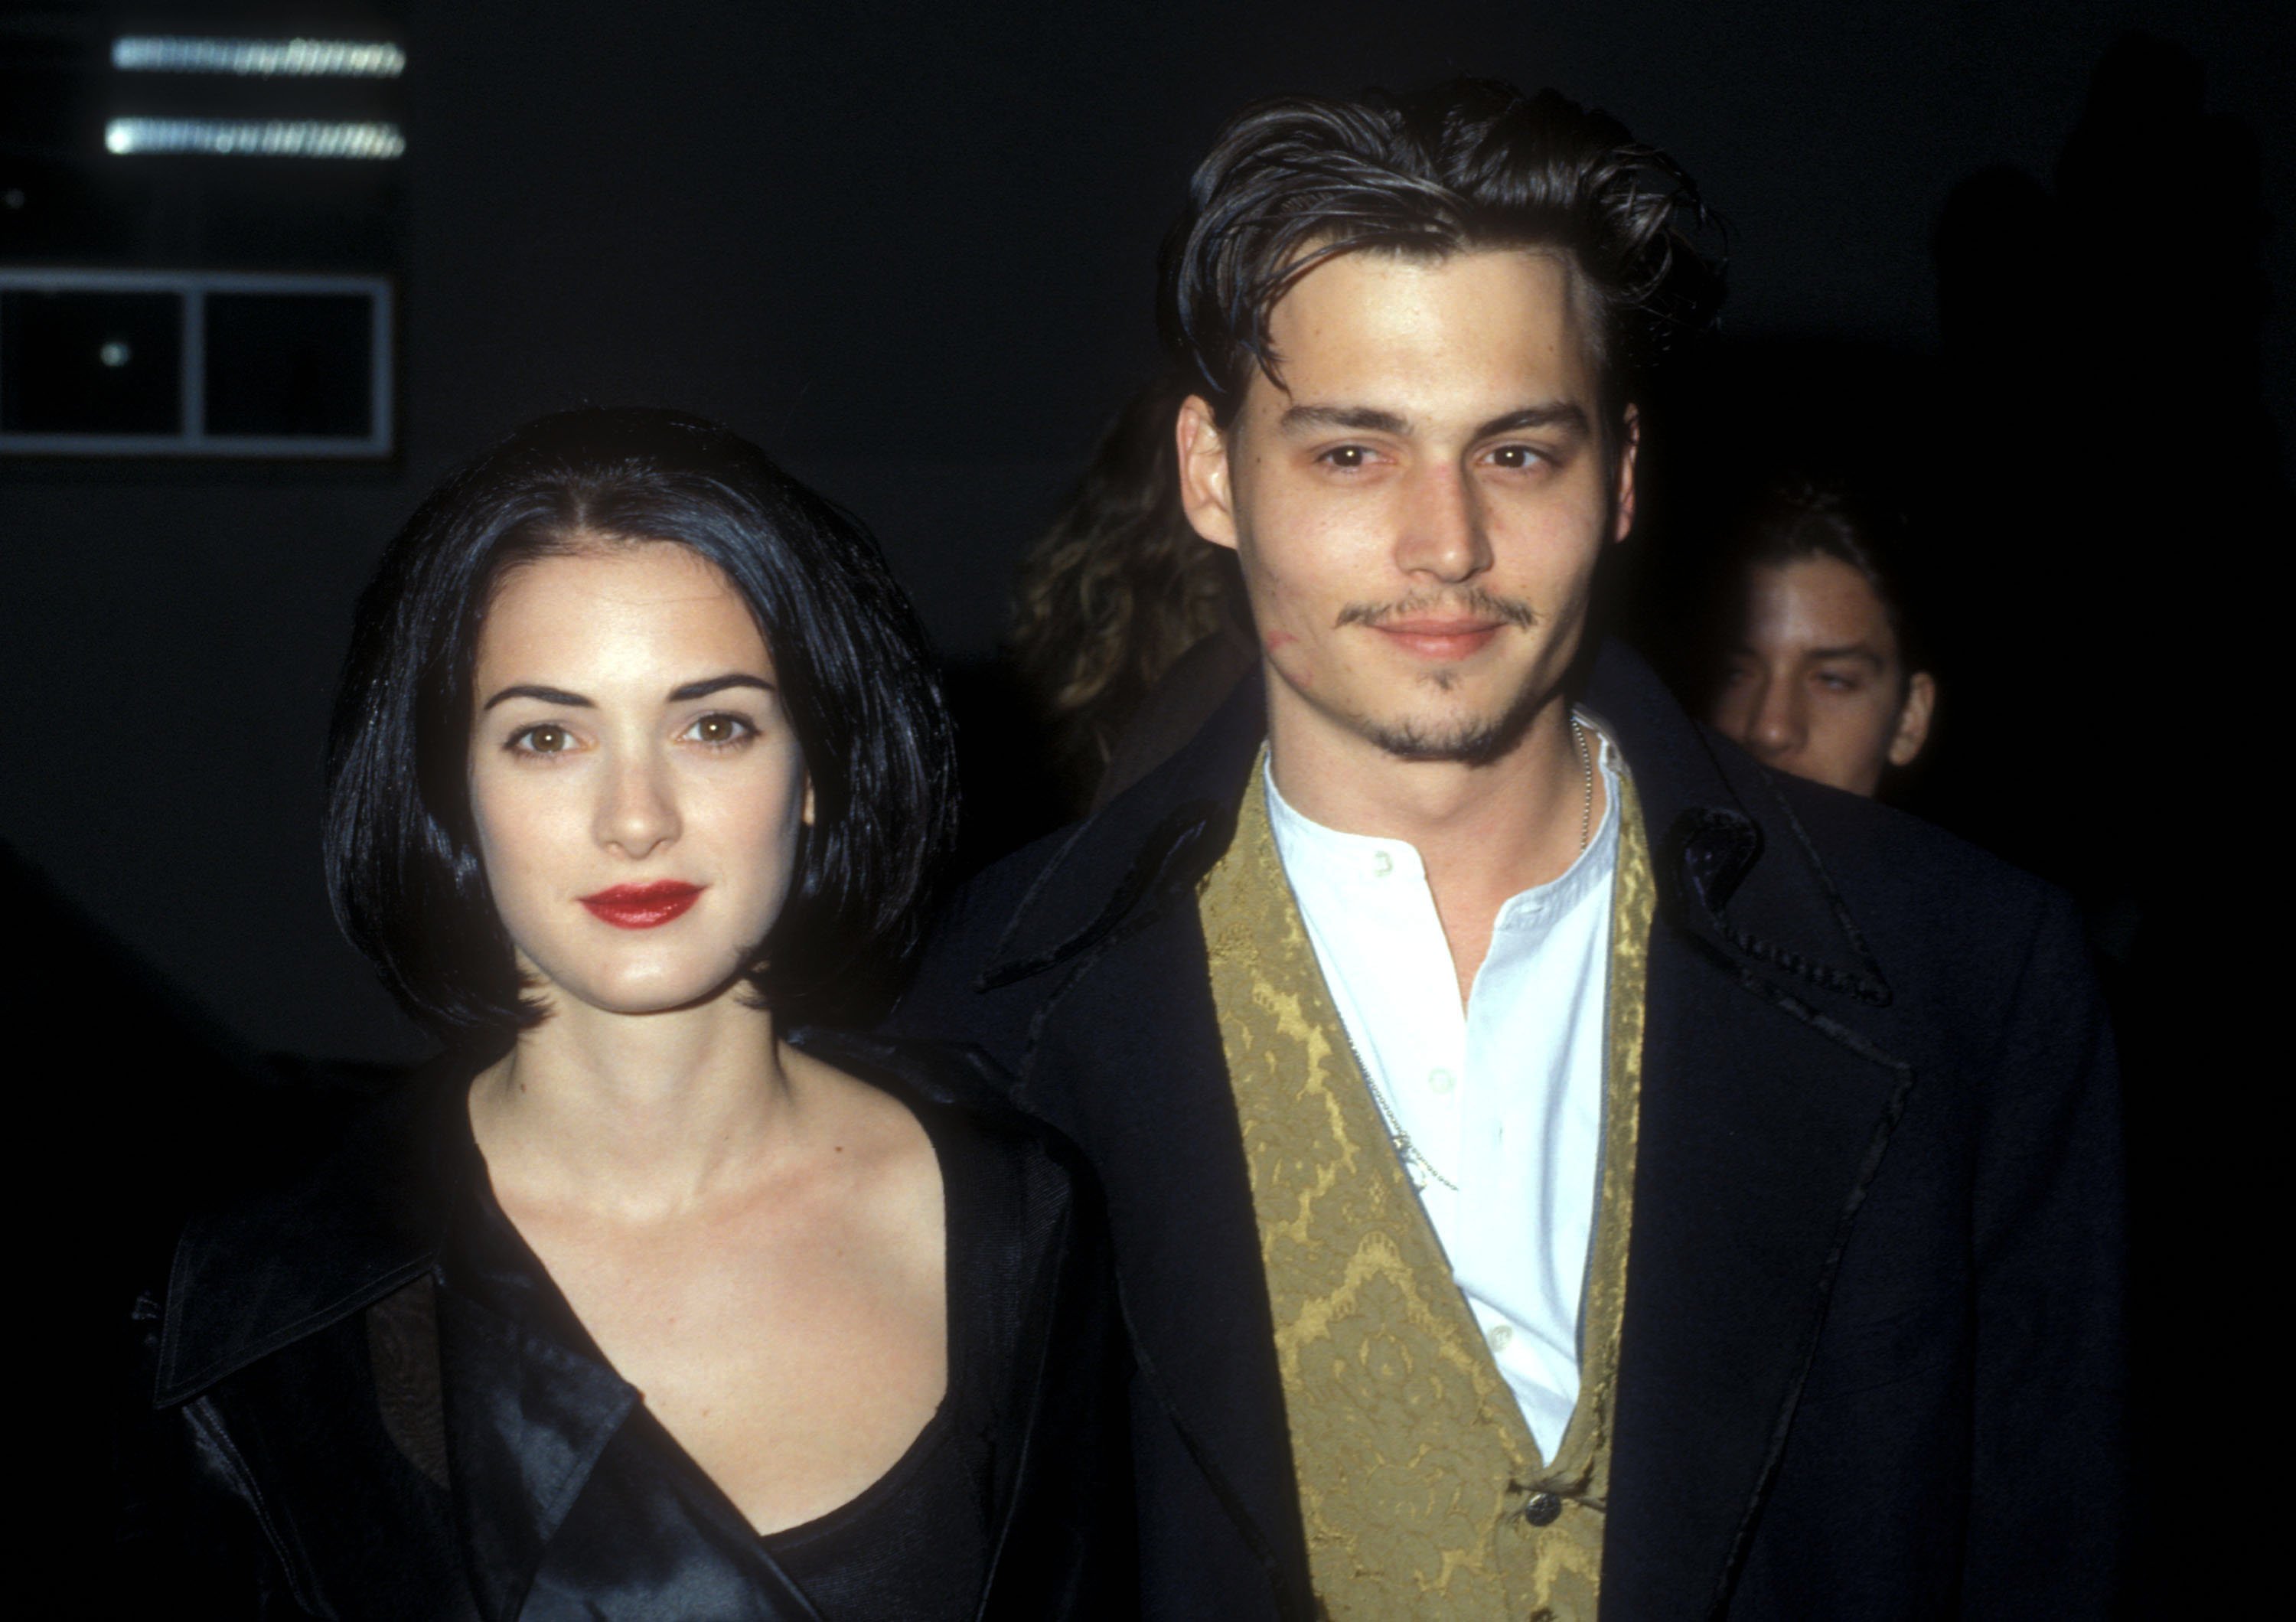 Johnny Depp and Winona Ryder at the premiere of "Edward Scissorhands" on December 6, 1990 | Source: Getty Images